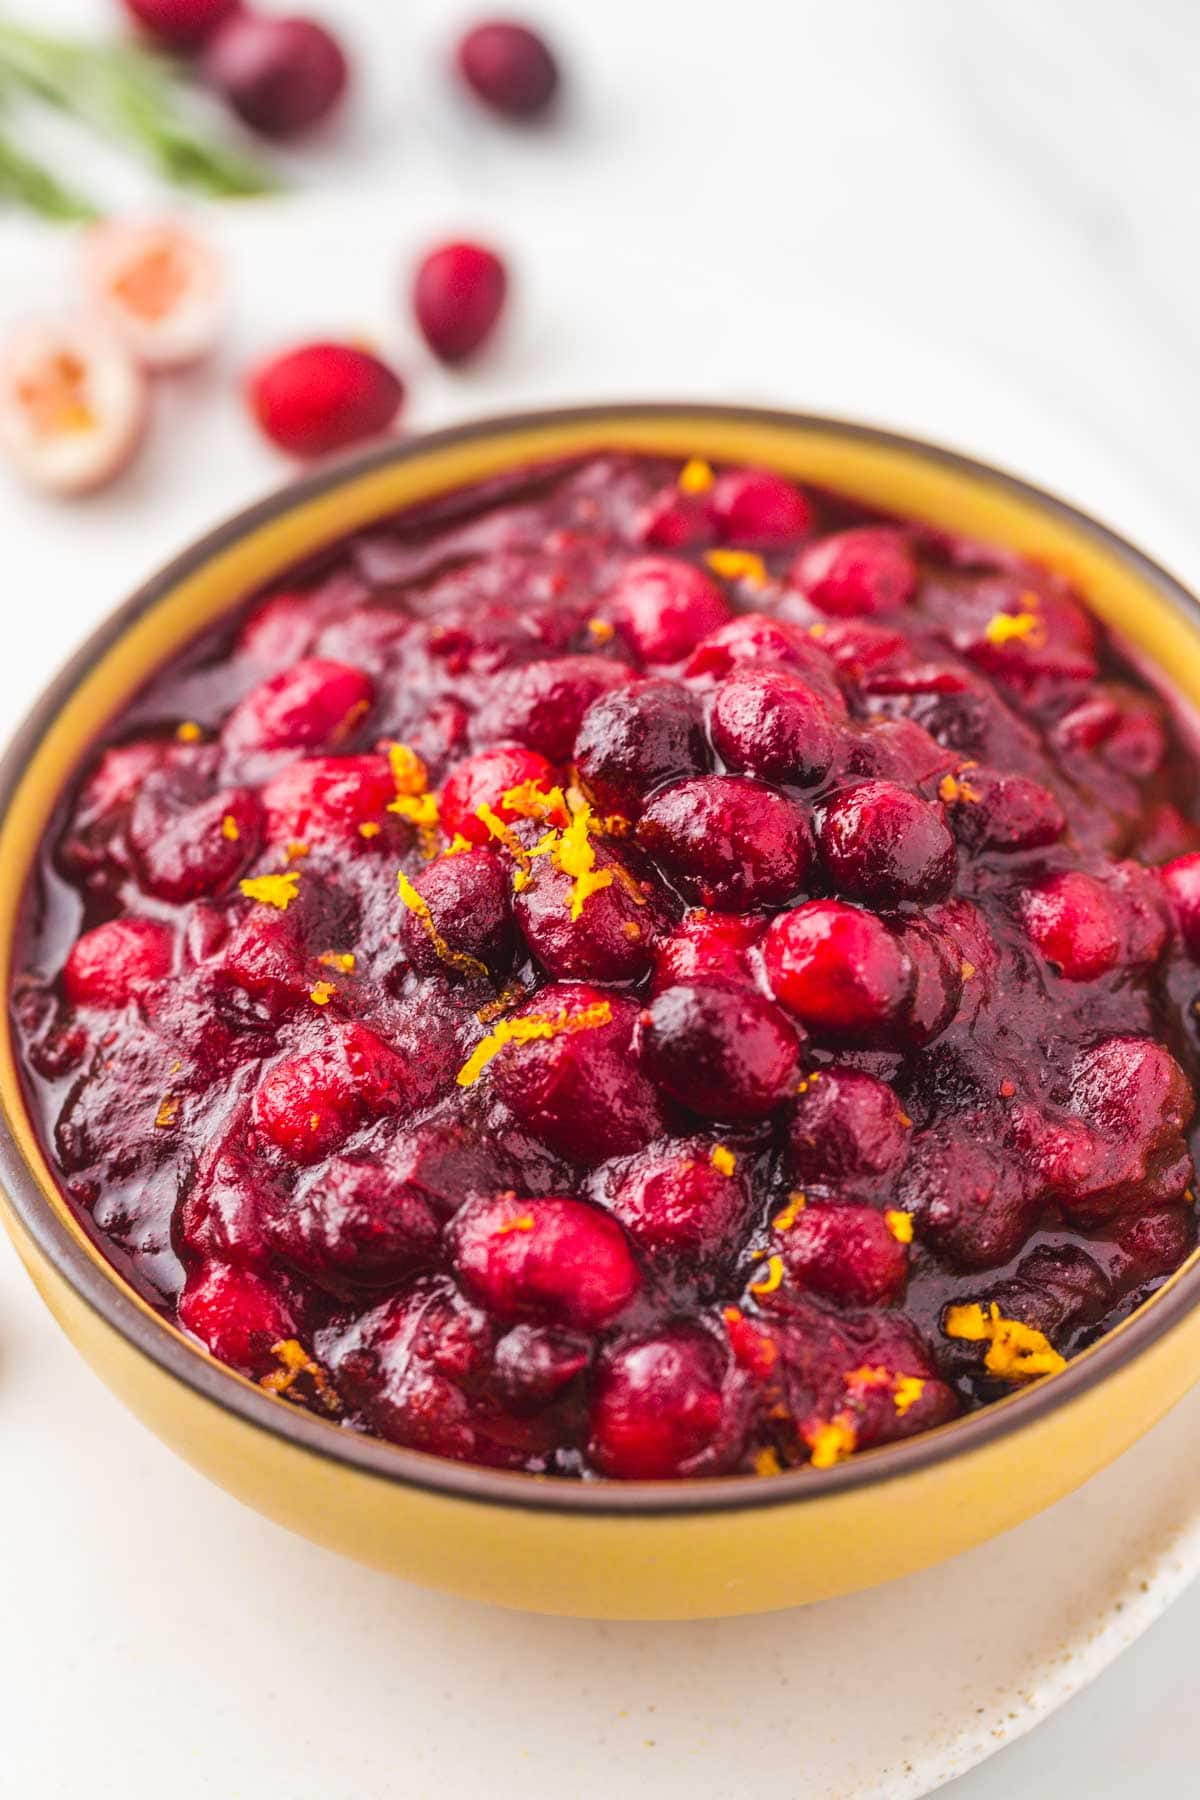 Cranberry sauce served in a yellow bowl